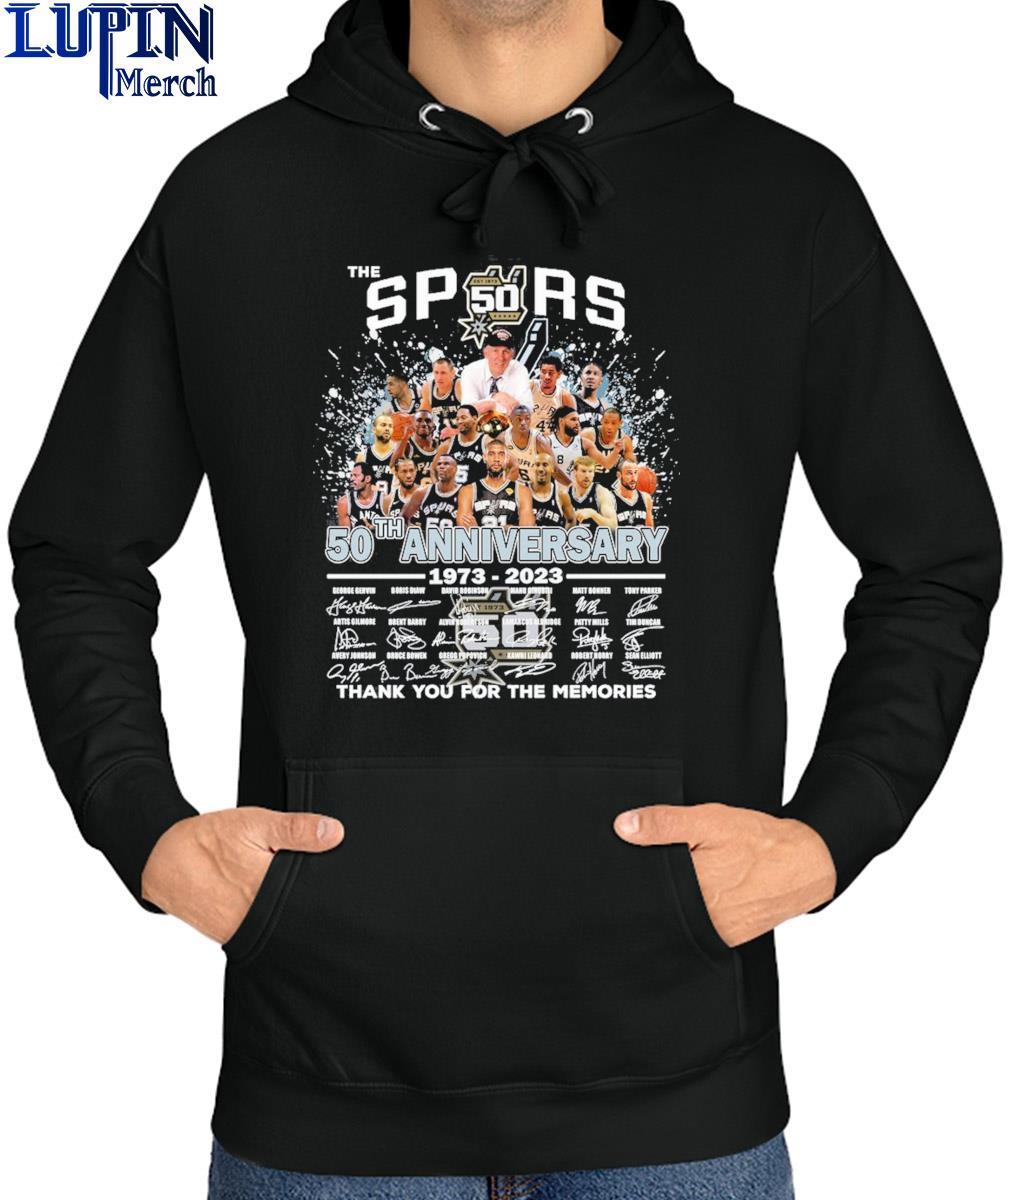 The San Antonio Spurs 50th anniversary 1973 2023 thank you for the